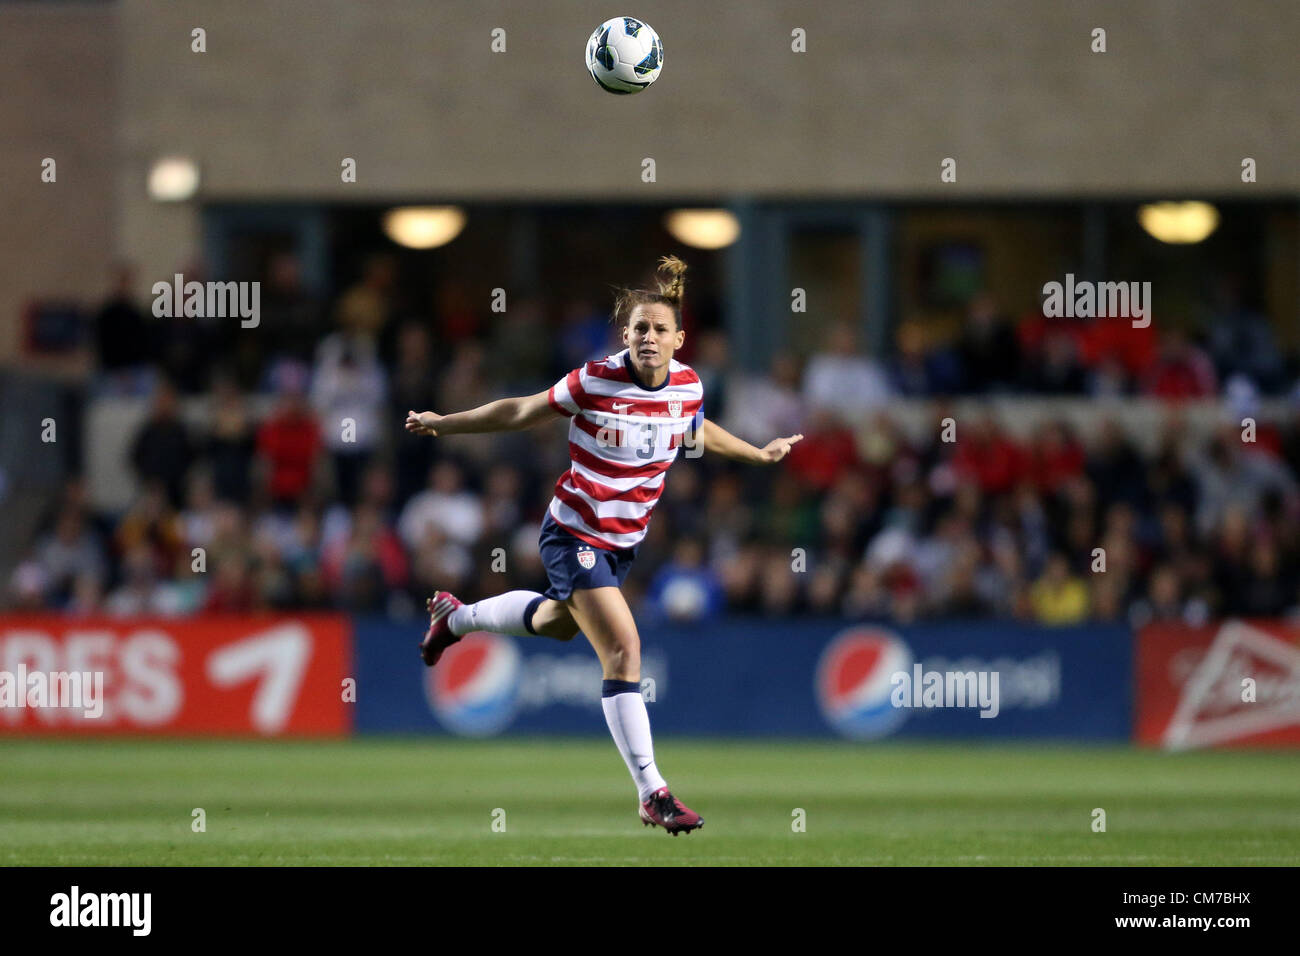 20.10.2012. Chicago, USA.  Christie Rampone (USA). The United States Women's National Team played the Germany Women's National Team at Toyota Park in Bridgeview, Illinois in a women's international friendly soccer match. The game ended in a 1-1 tie. Stock Photo